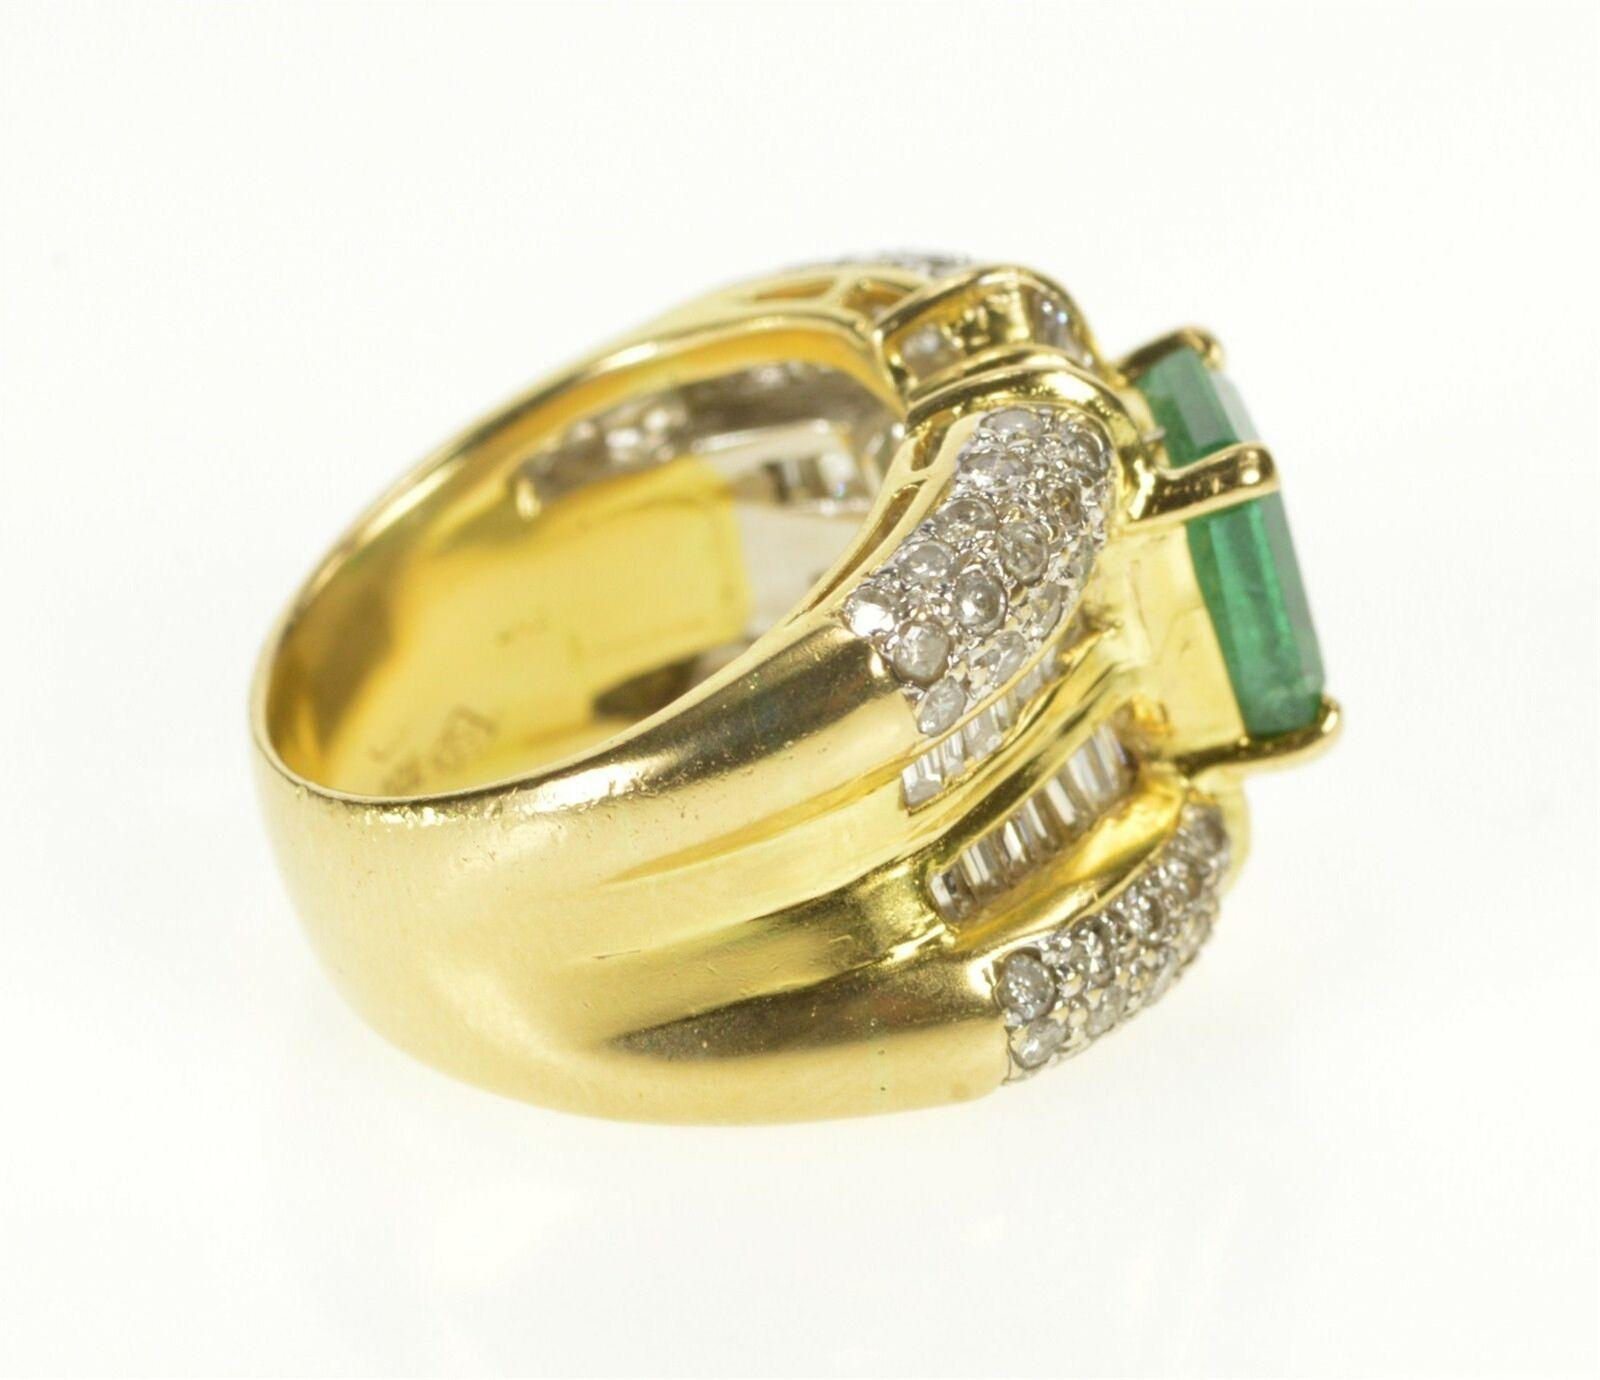 Elegant  Emerald & Diamond Ring with over 4 ctw of emerald and diamond. Currently a size 6.25 crafted with 14 grams of 18k yellow gold. 

Gem Stone:  1.75 Ctw=100x Baguette & Round Diamond

Center Gem Stone:  2.35 Ct Natural Emerald Cut Emerald